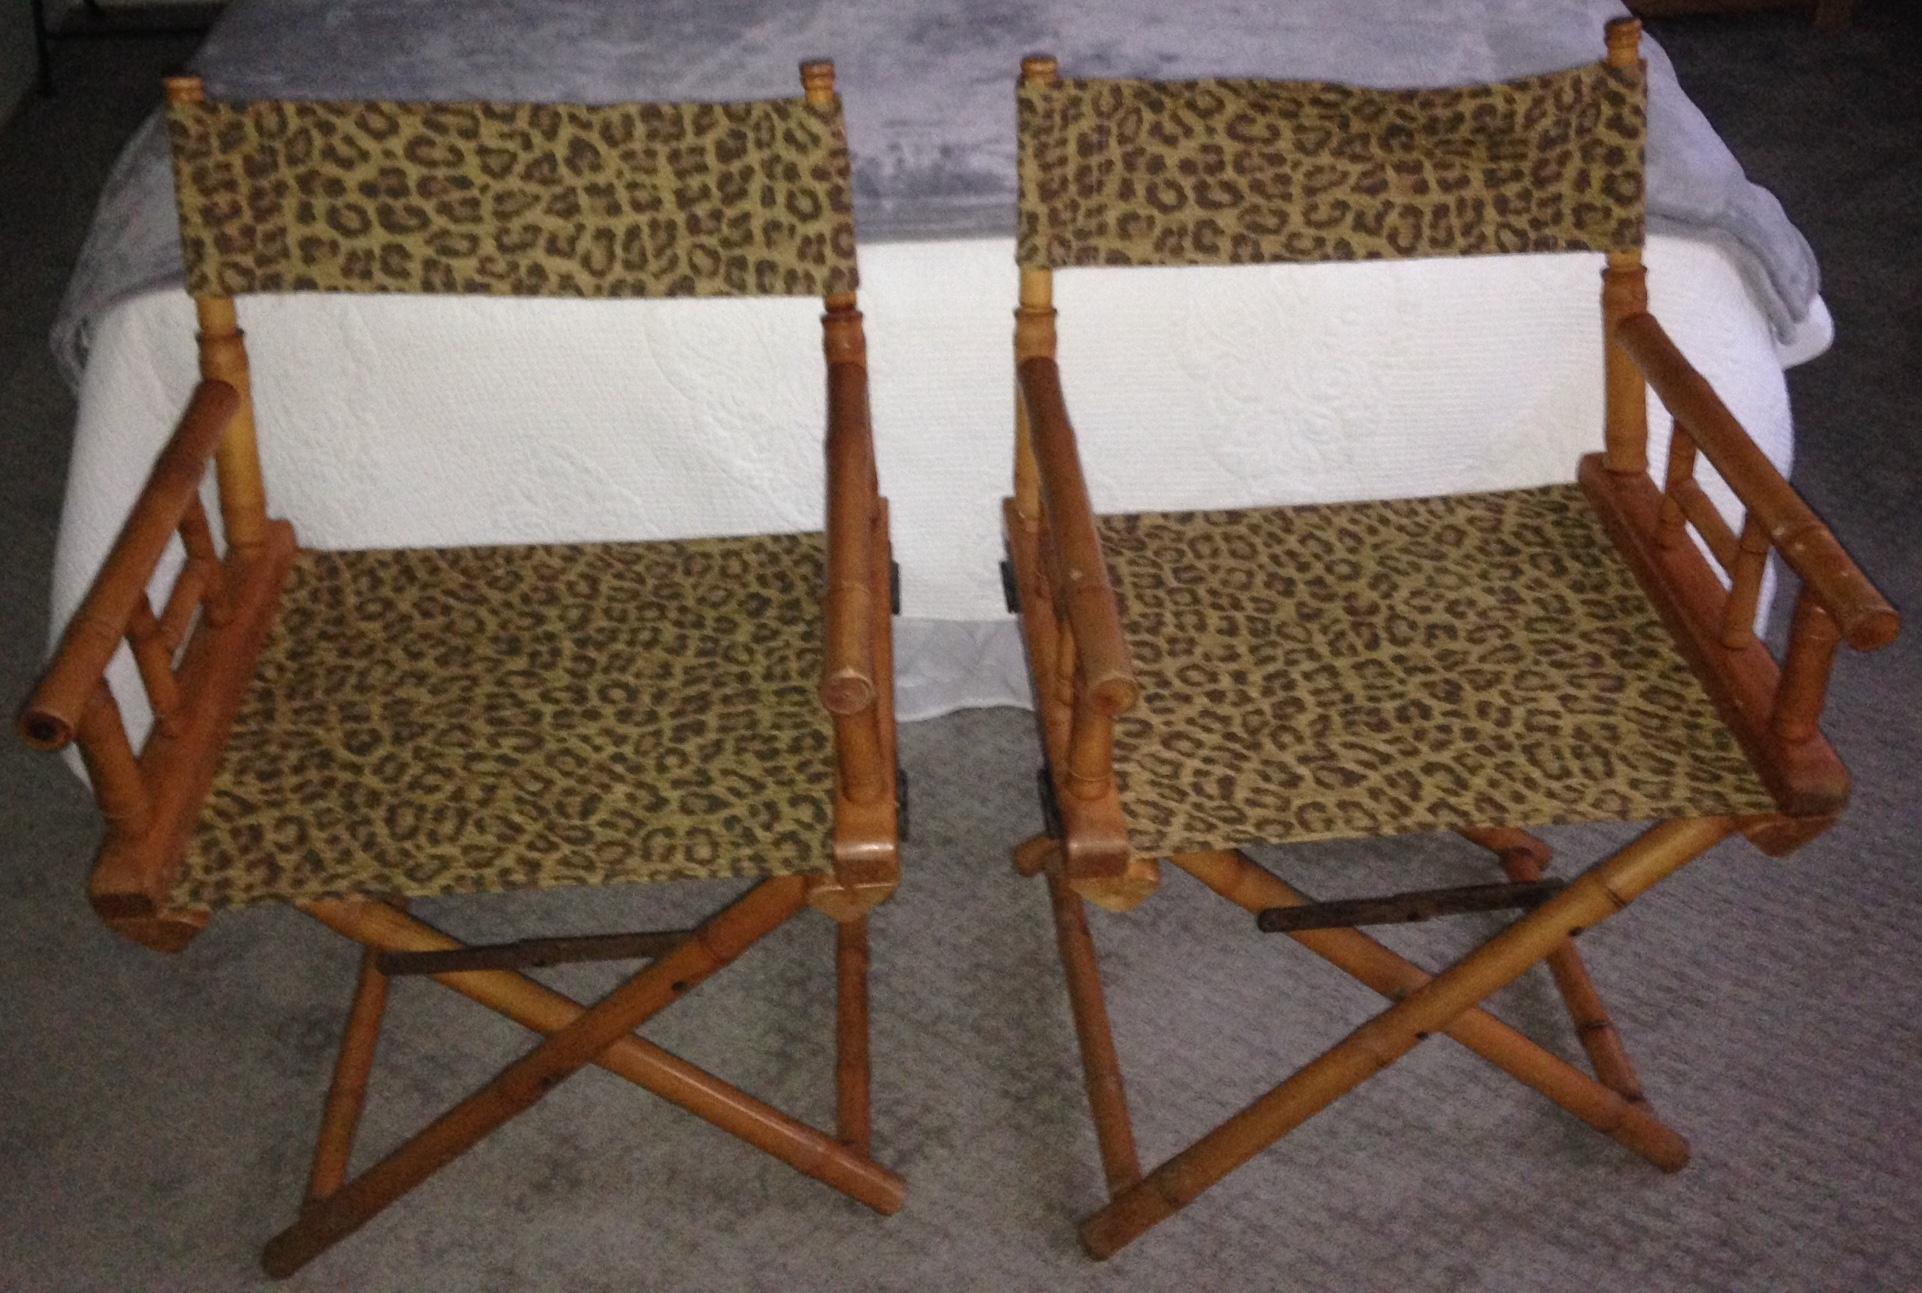 Directors chairs, pair, upholstered in leopard print design fabric. Made by Telescope Chair Company. Midcentury. Sturdy, comfortable. Fold up easily with brass hinges for transport to beach, concert, picnic, summer porch, winter study. Priced as a